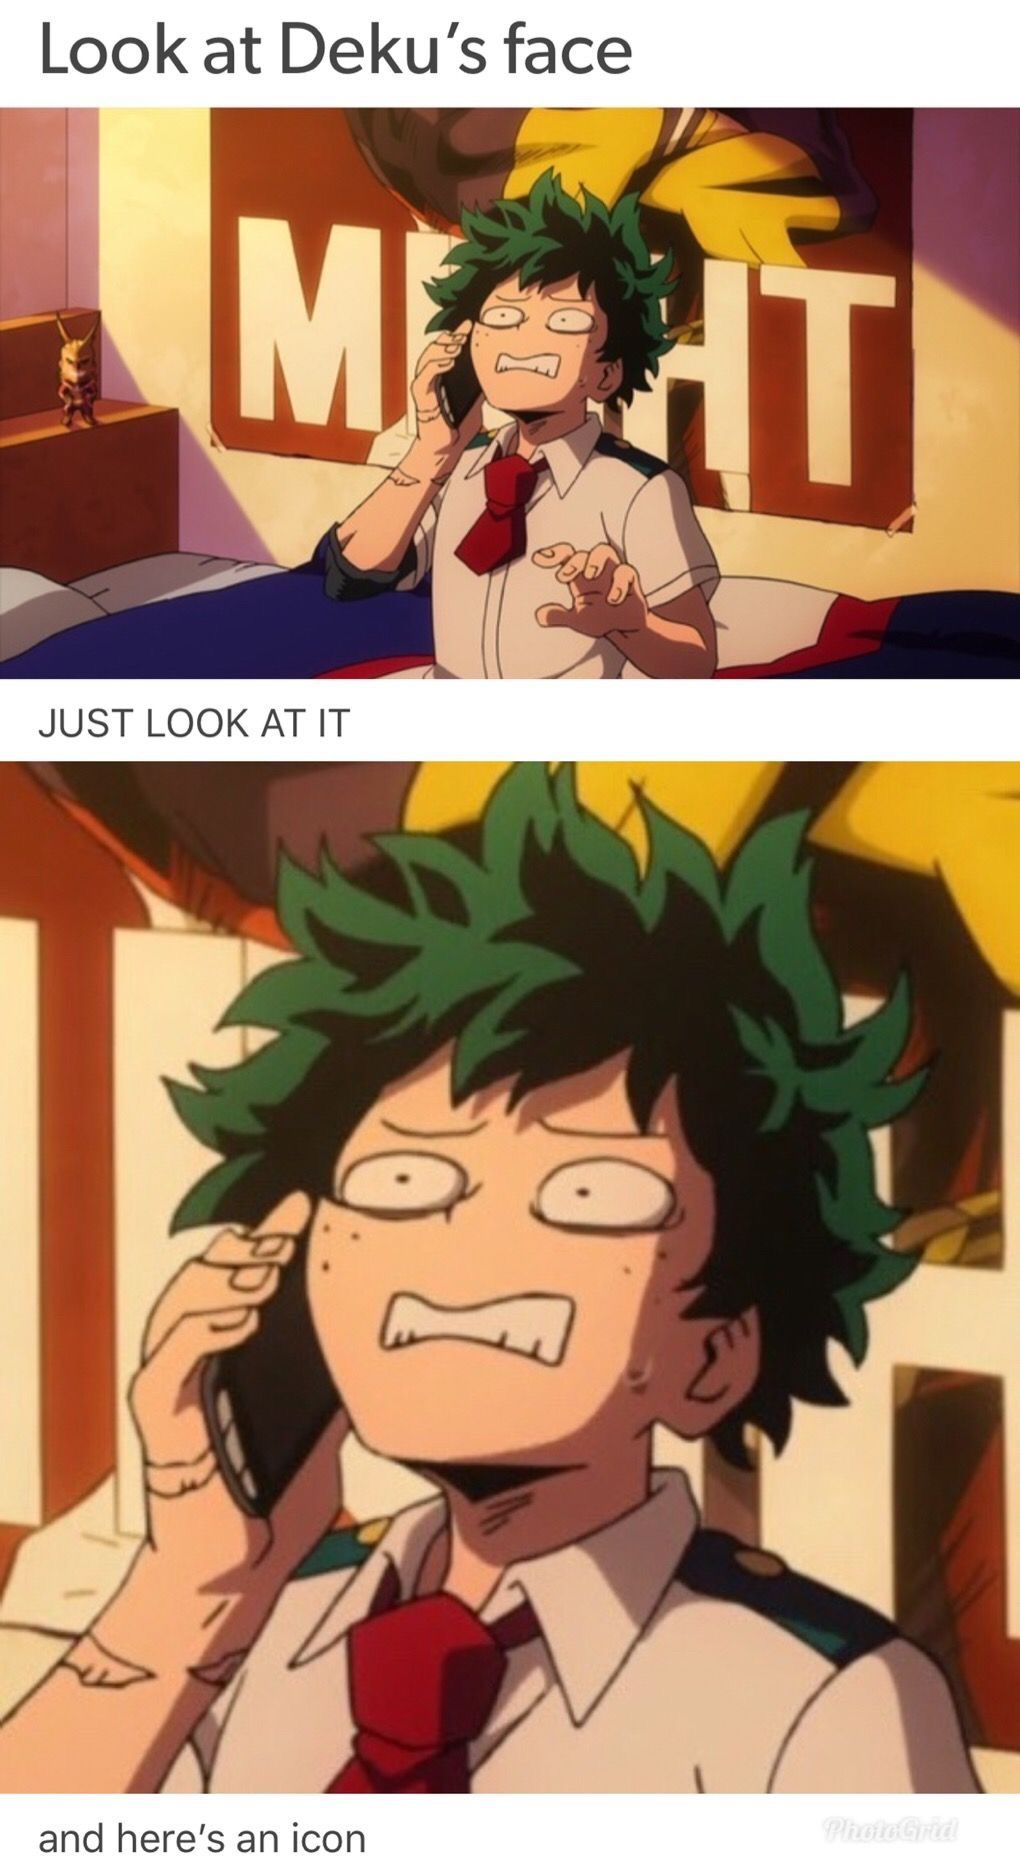 billie jo bell recommends funny pictures of my hero academia pic